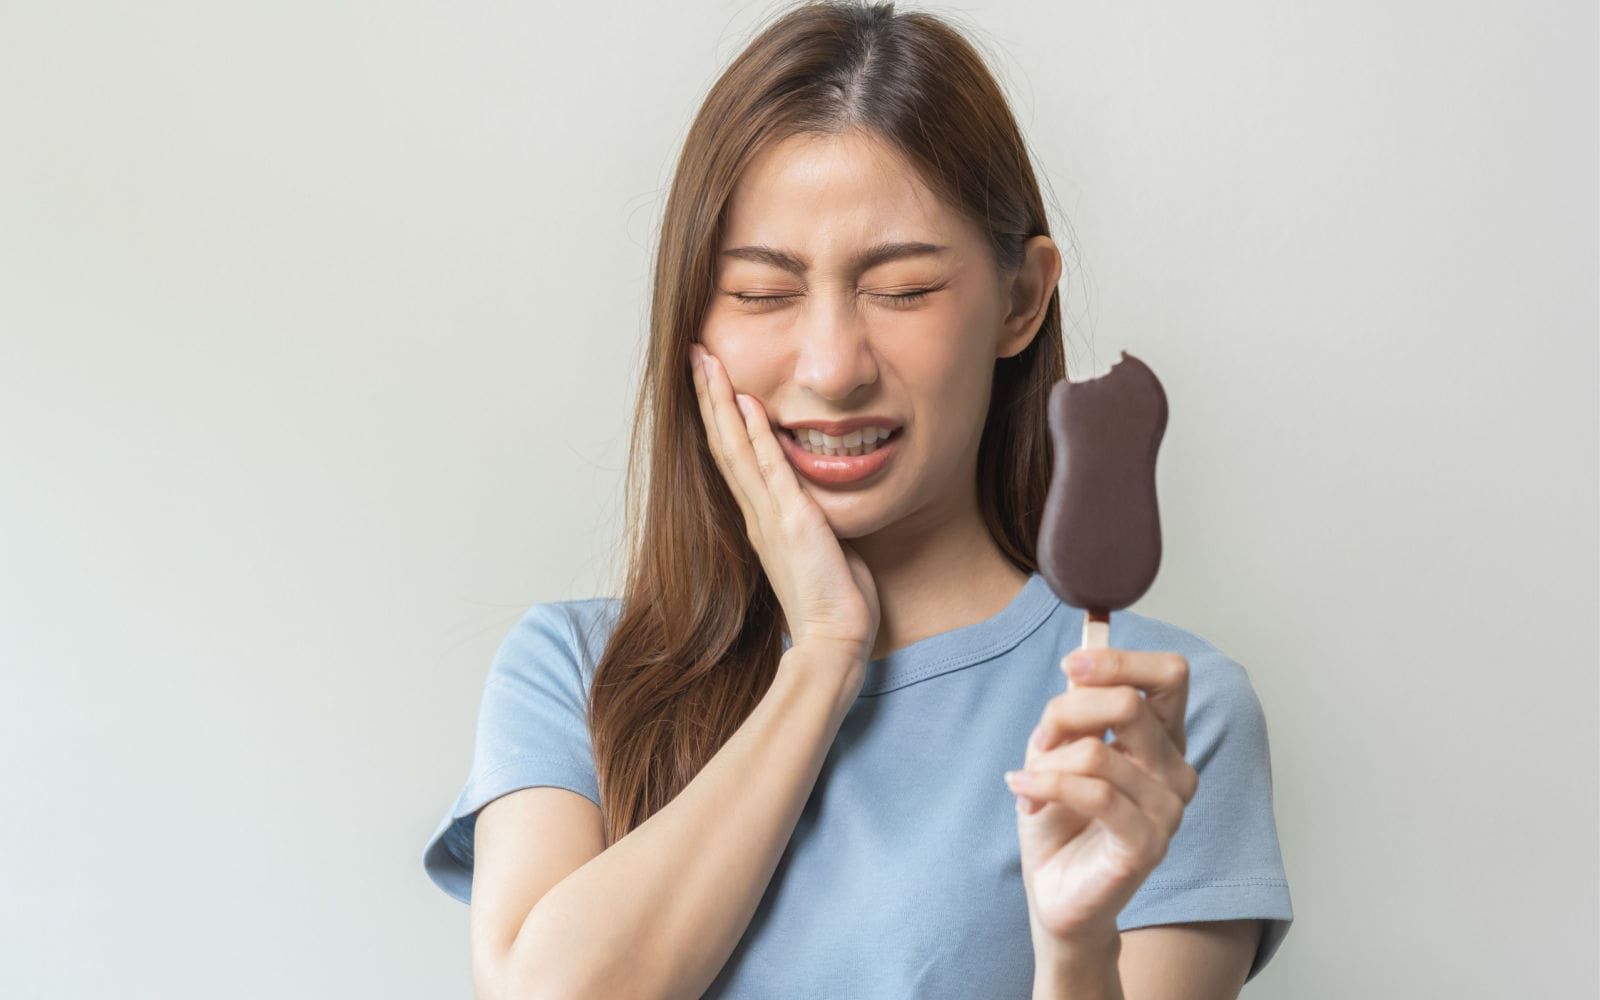 Woman with Sensitive Teeth After Eating Ice Cream